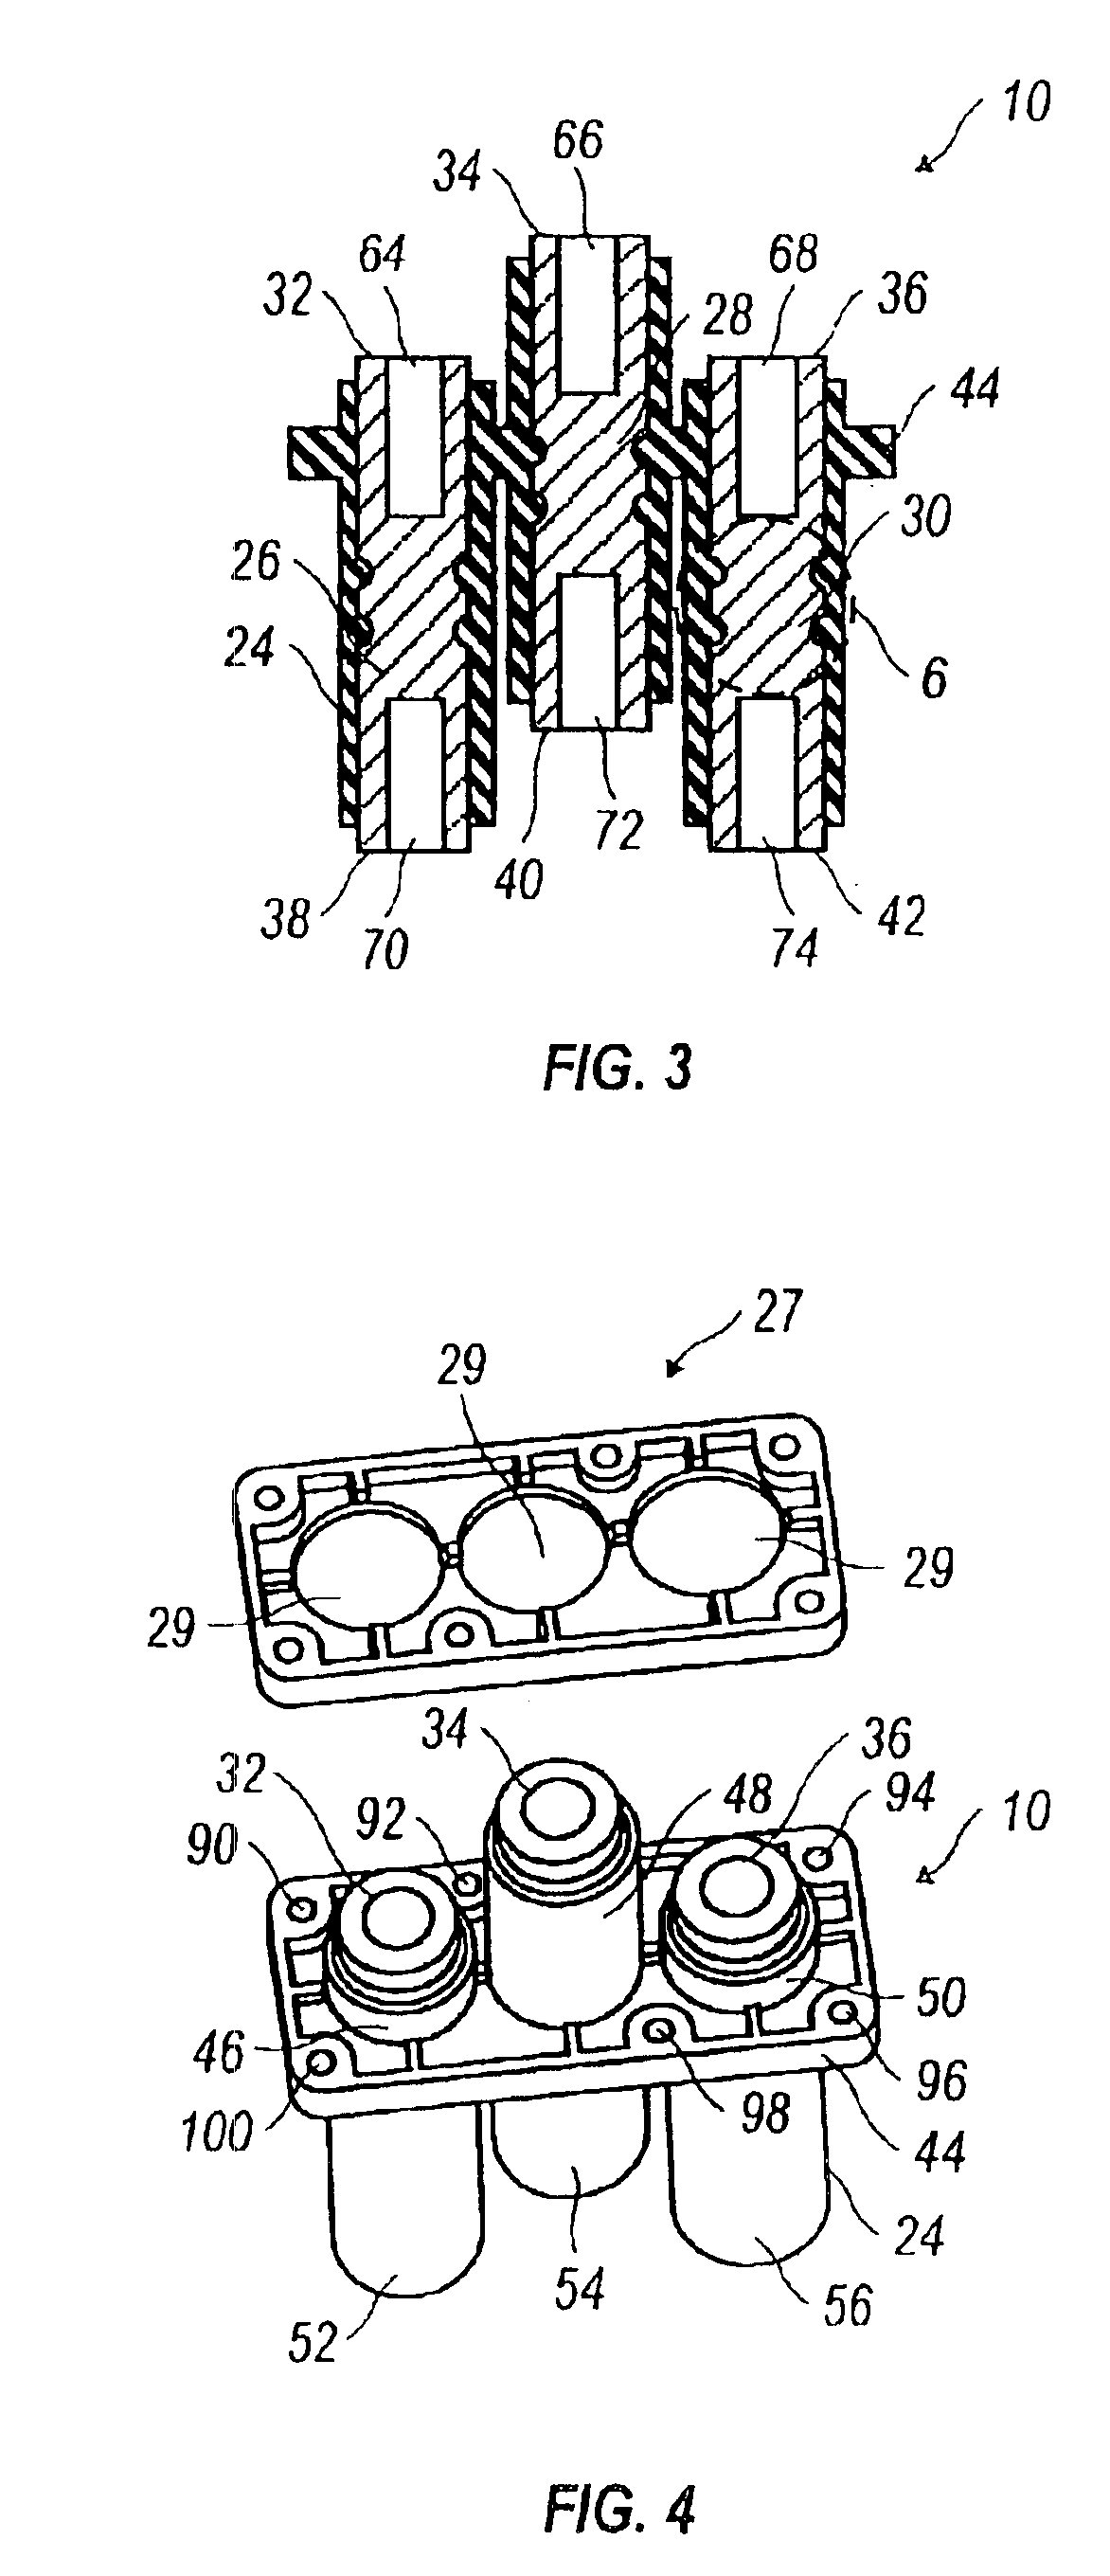 Three-phase connector for electric vehicle drivetrain